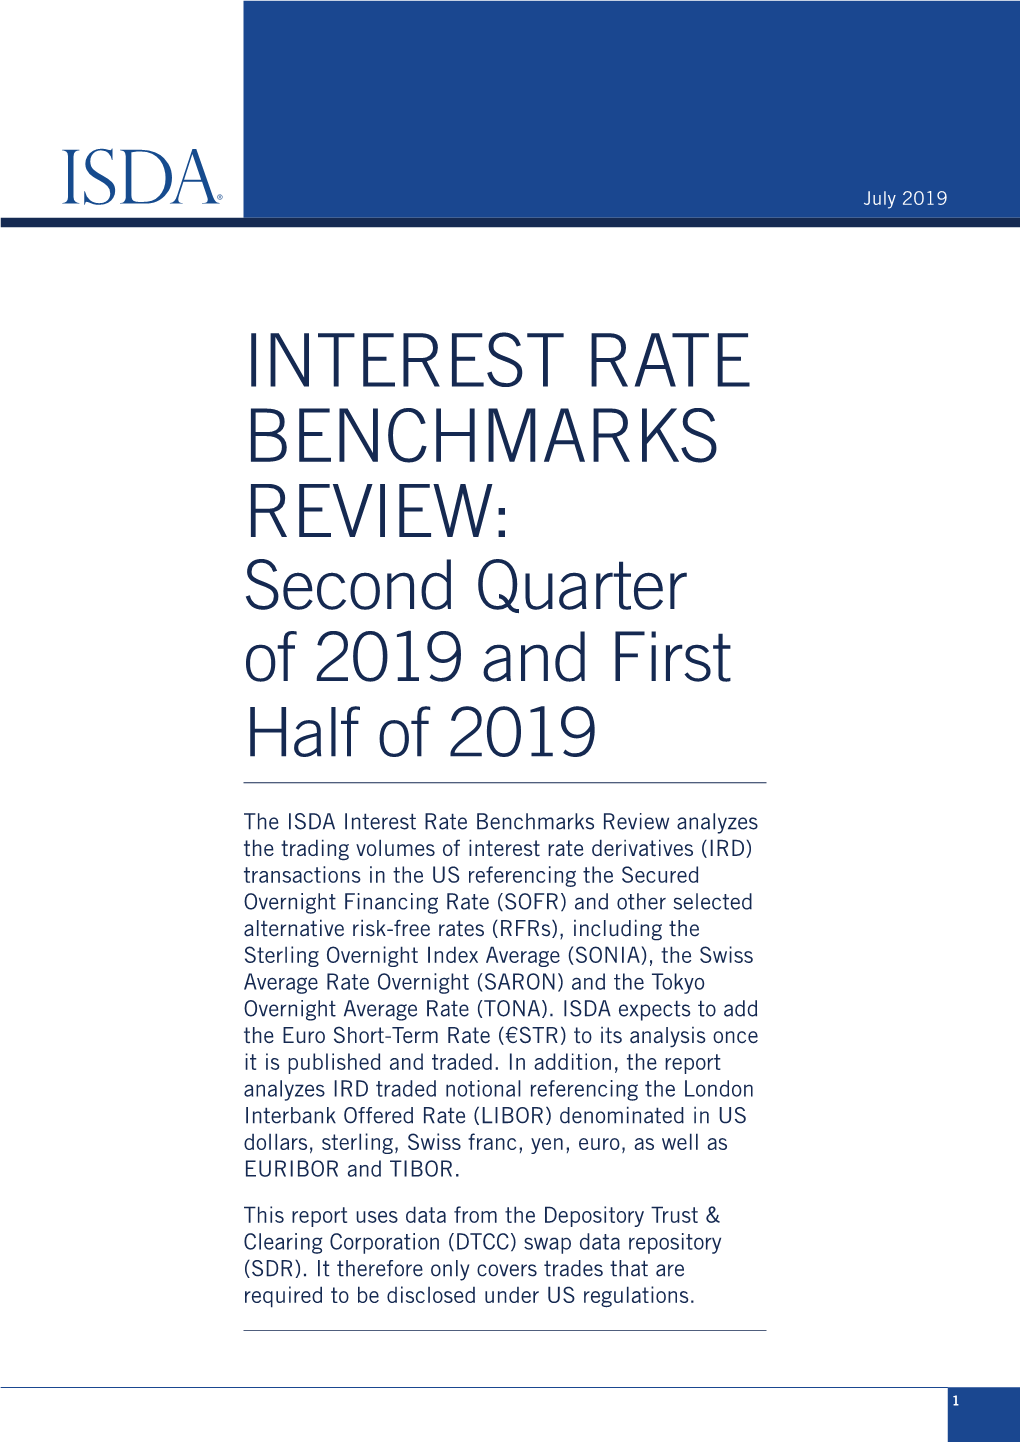 INTEREST RATE BENCHMARKS REVIEW: Second Quarter of 2019 and First Half of 2019